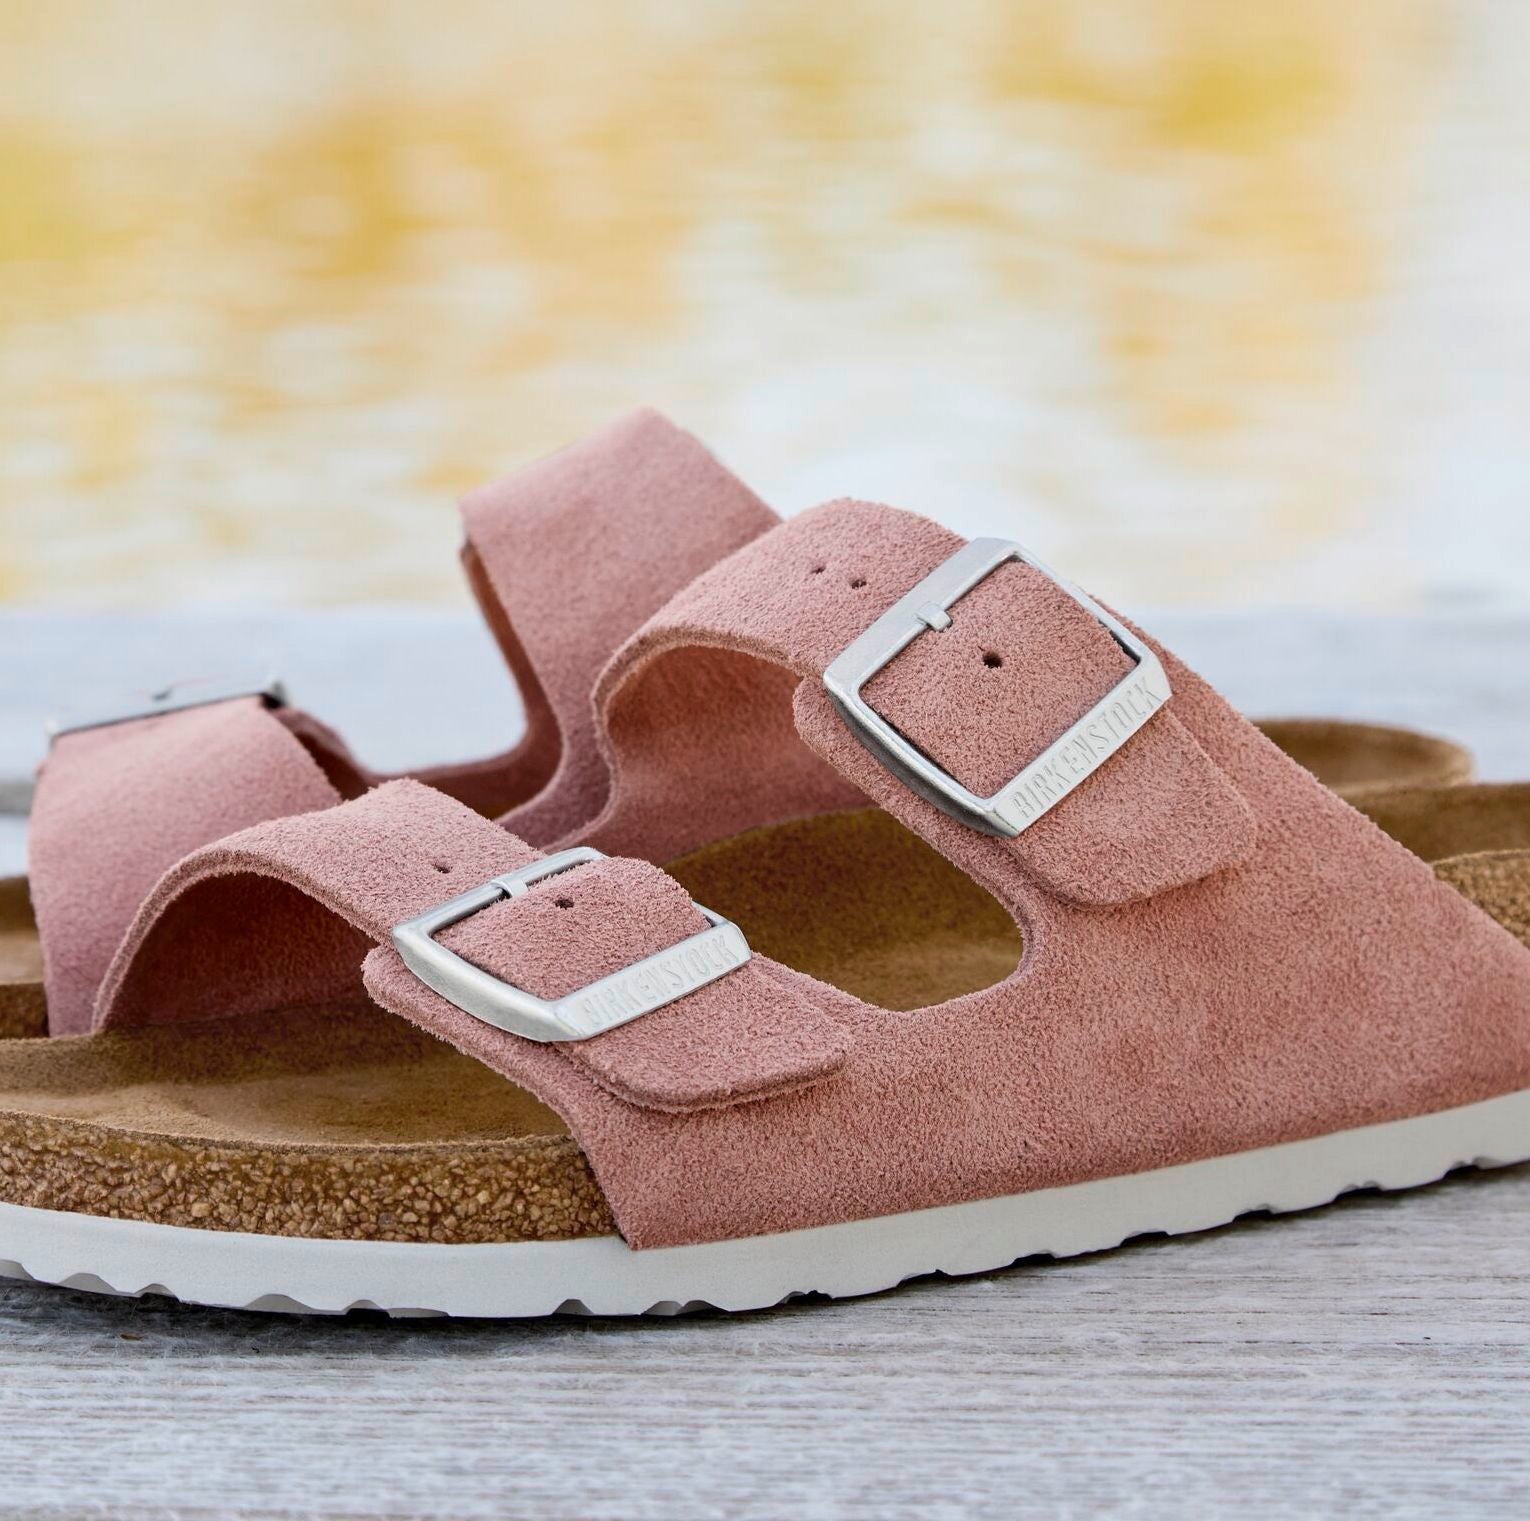 Birkenstock Limited Edition Arizona Soft Footbed pink clay suede